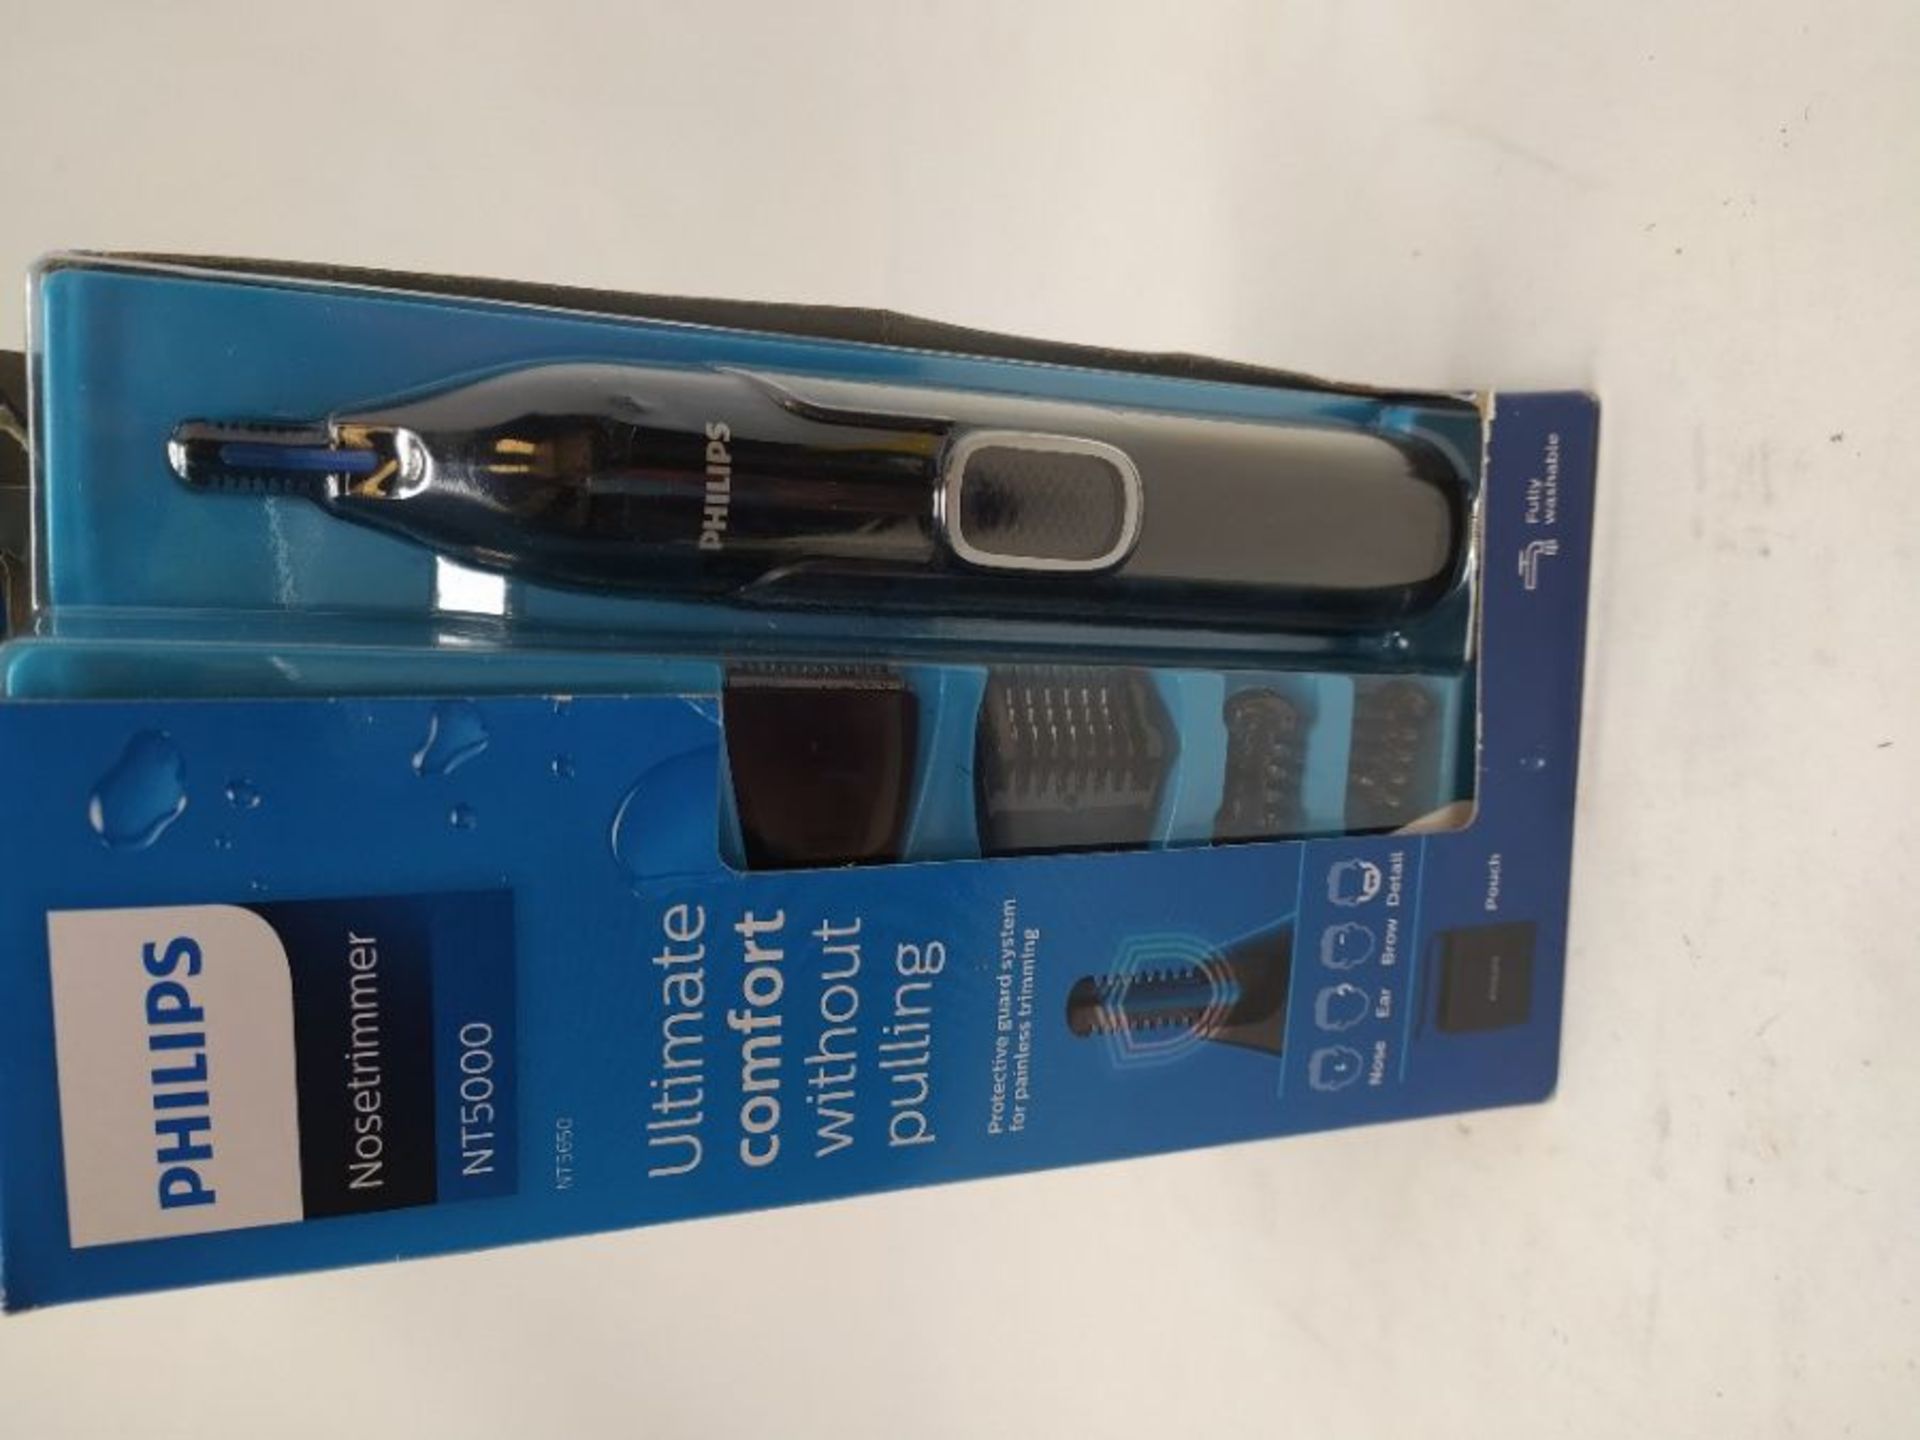 Philips Nose Hair Trimmer, Series 5000 Nose, Ear and Eyebrow Trimmer with Detail Trimm - Image 2 of 2